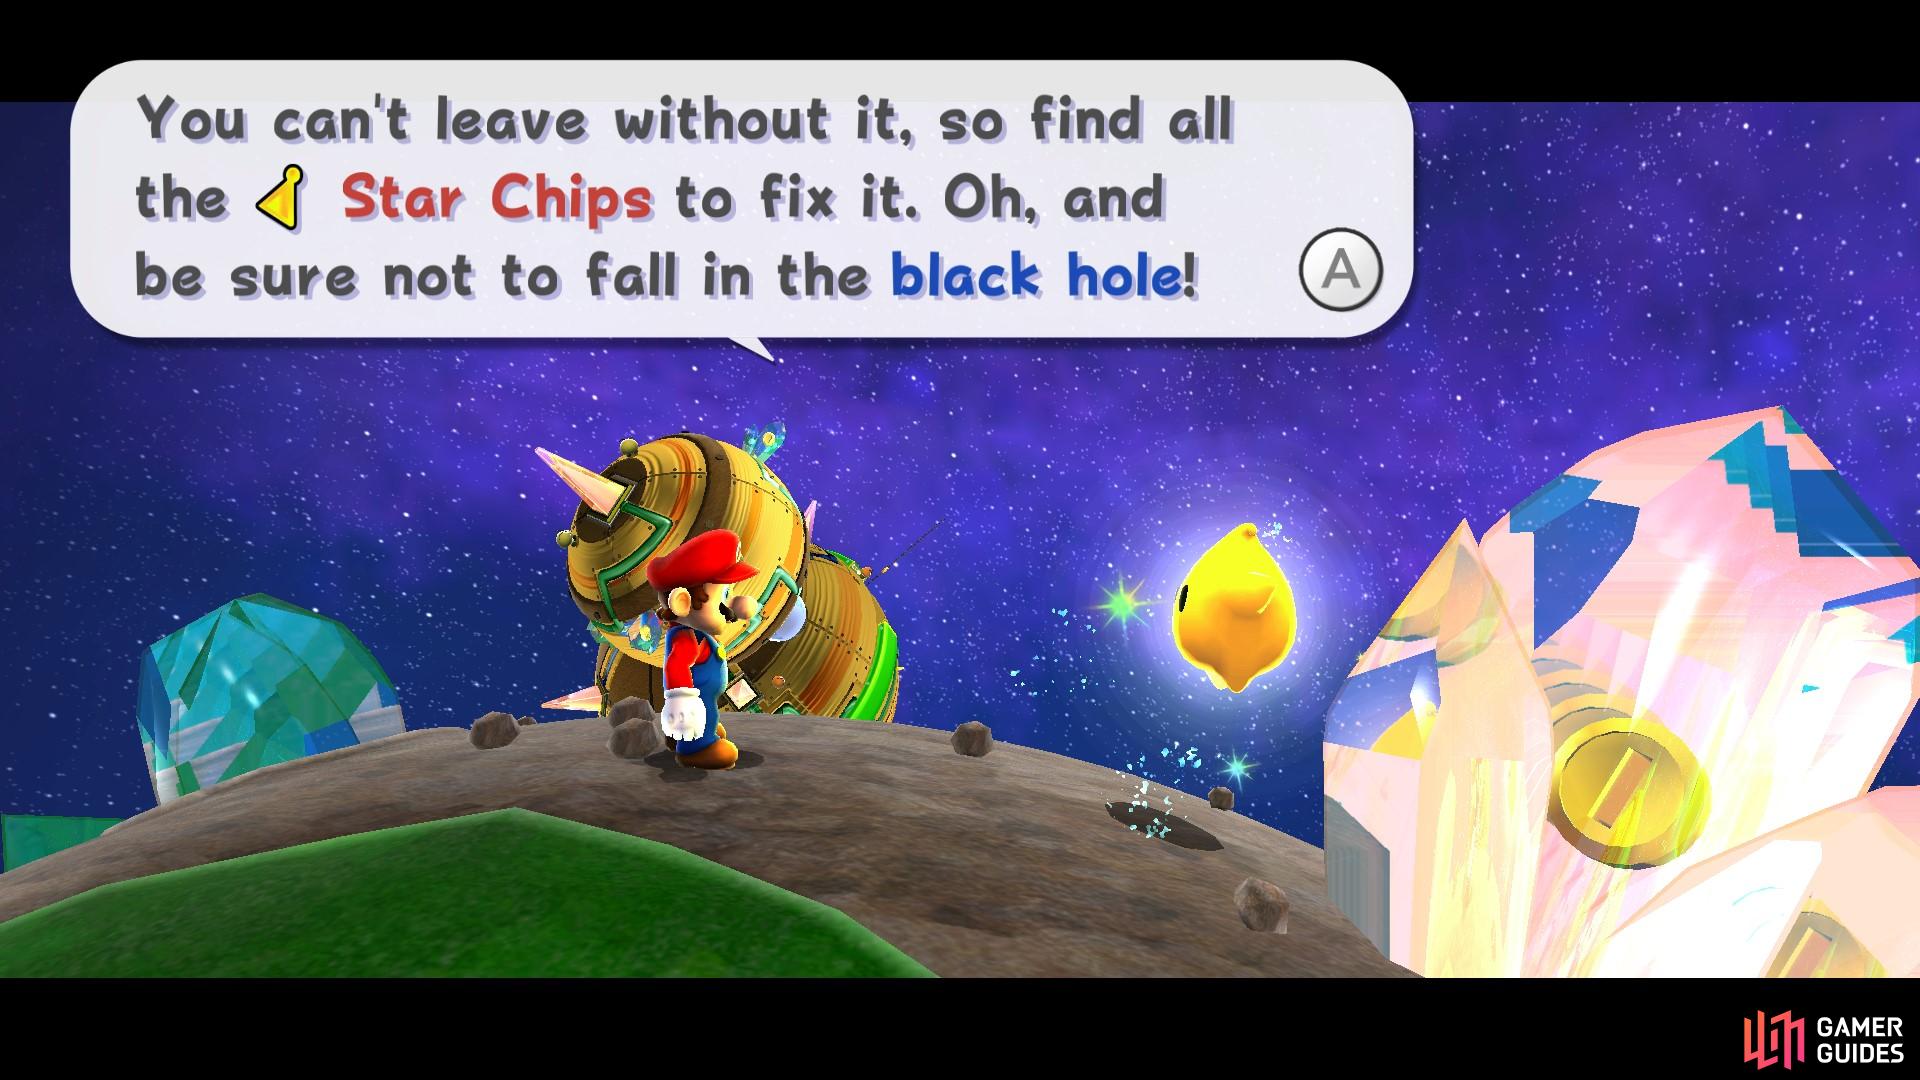 You’ll need to collect all the Star Chips to continue.